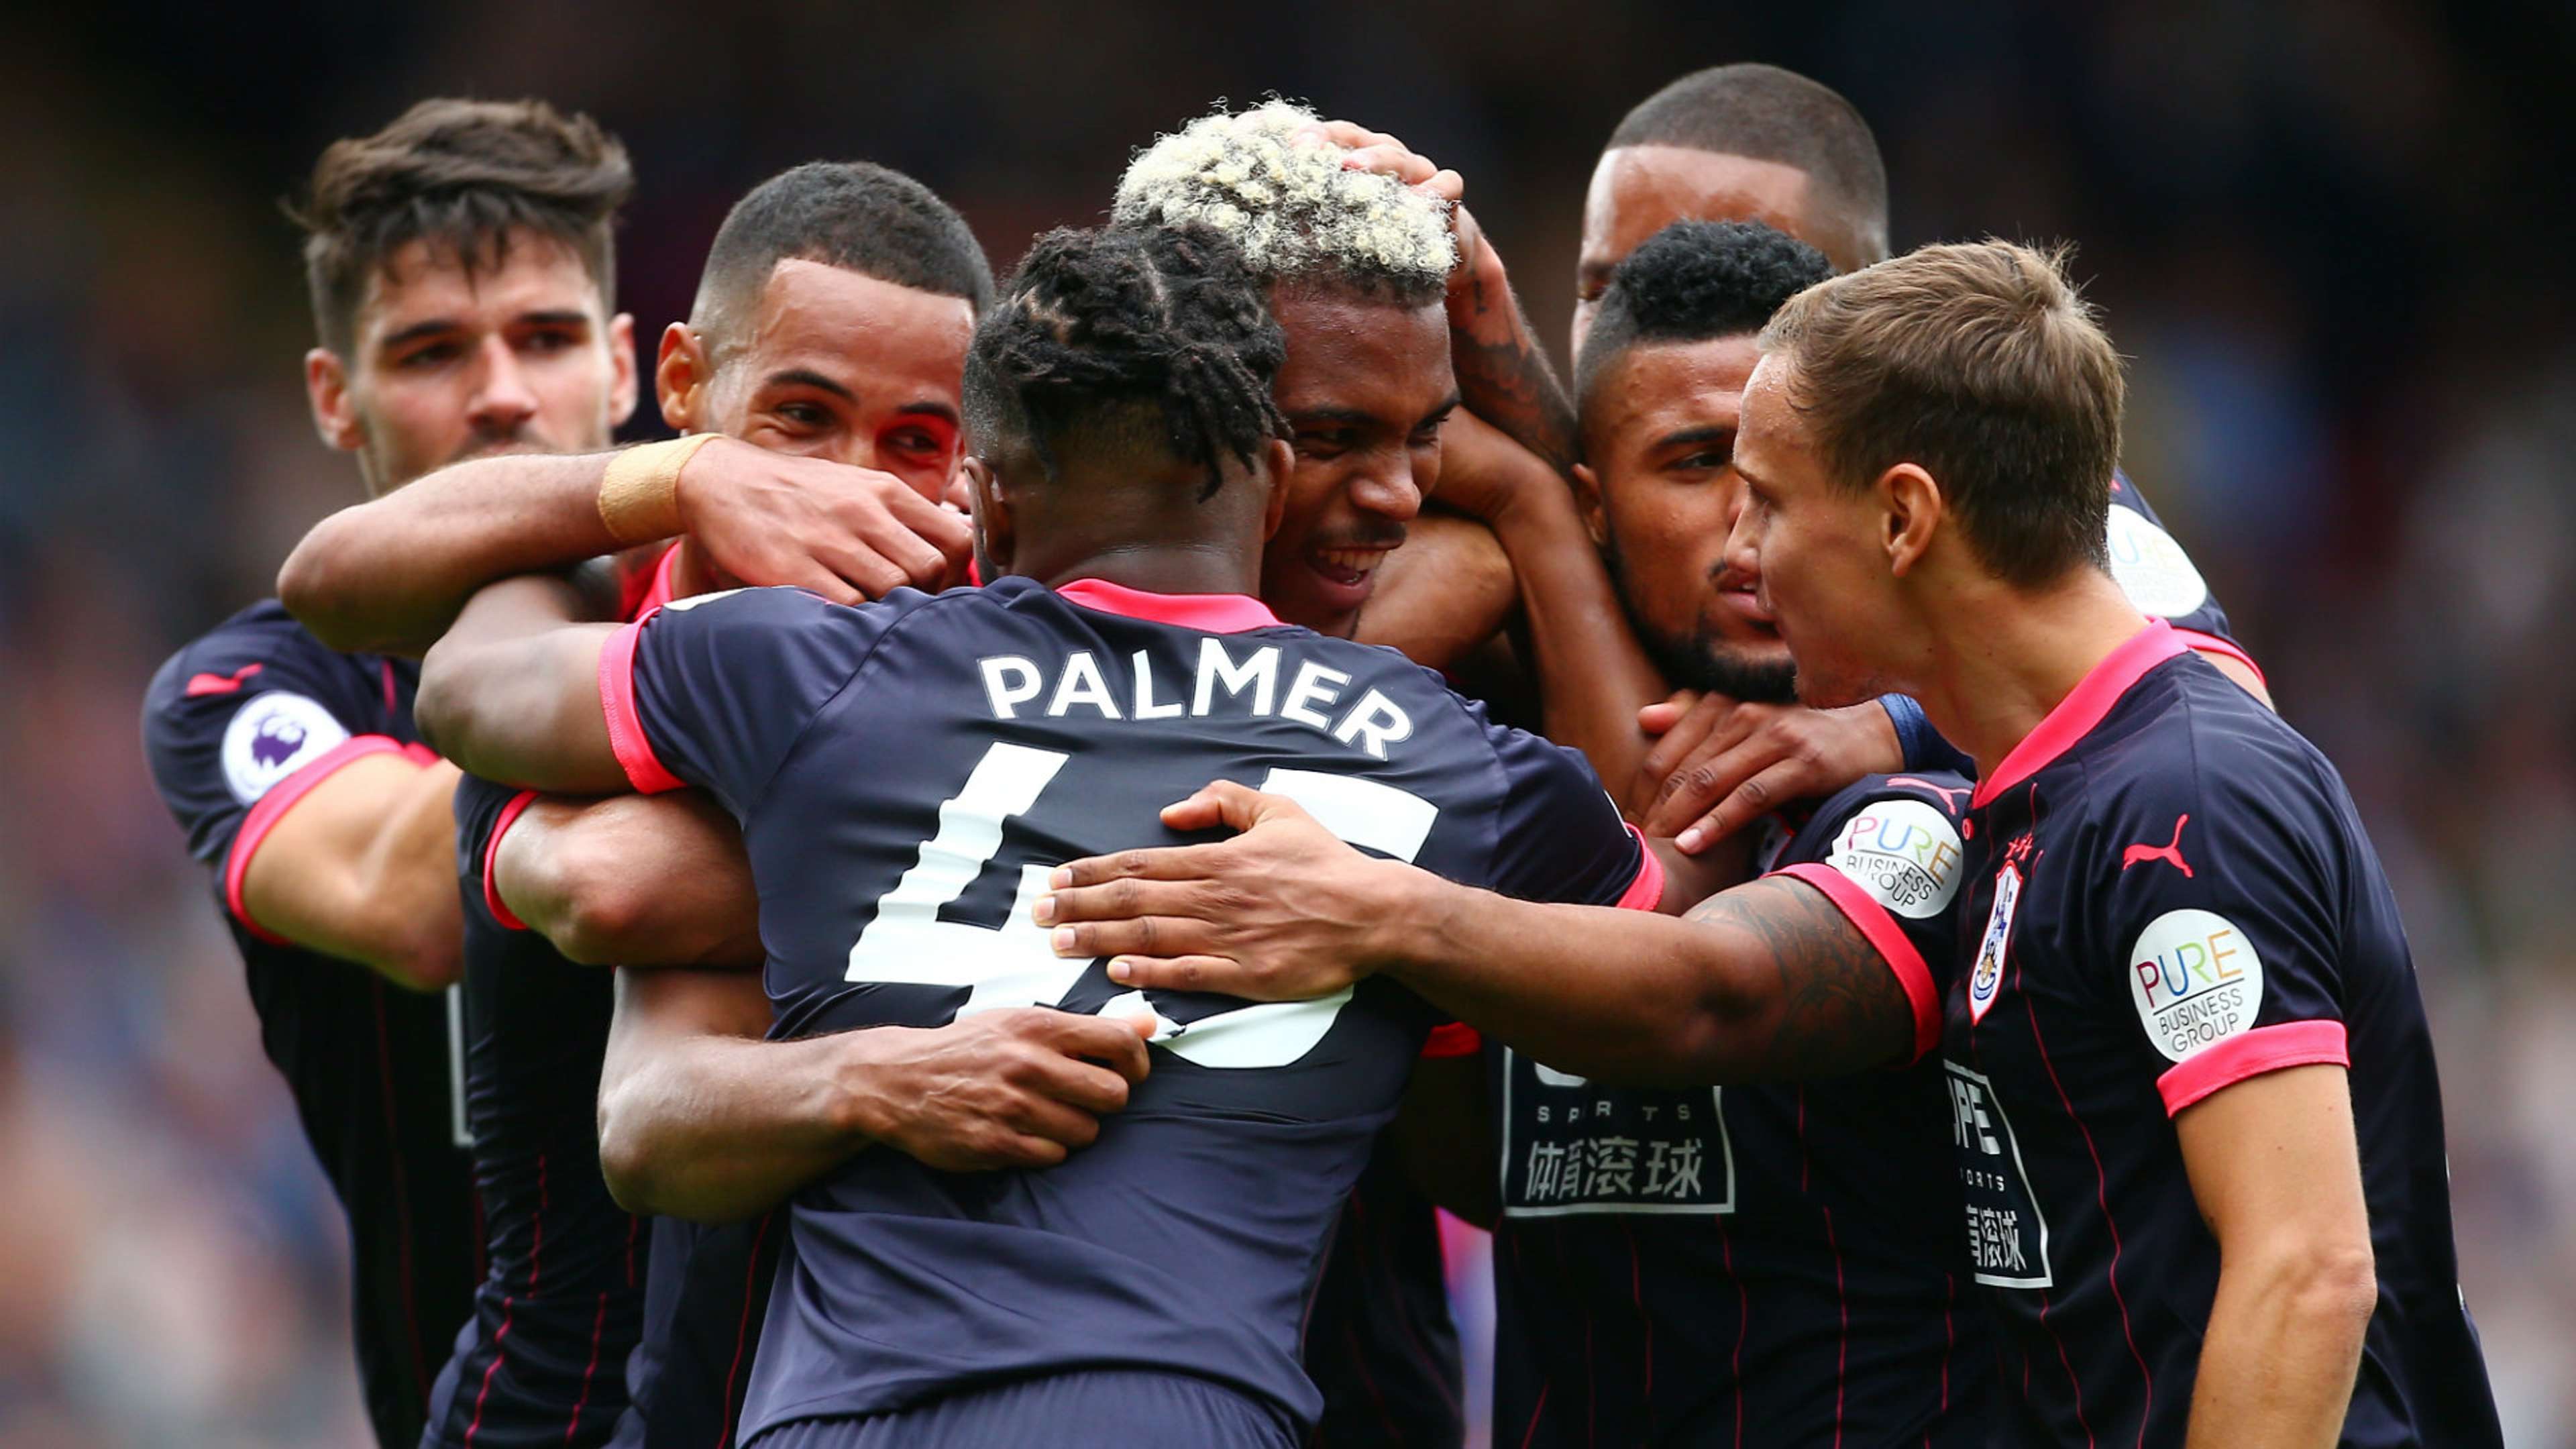 Crystal Palace v Huddersfield, Premier League opening day 2017/18